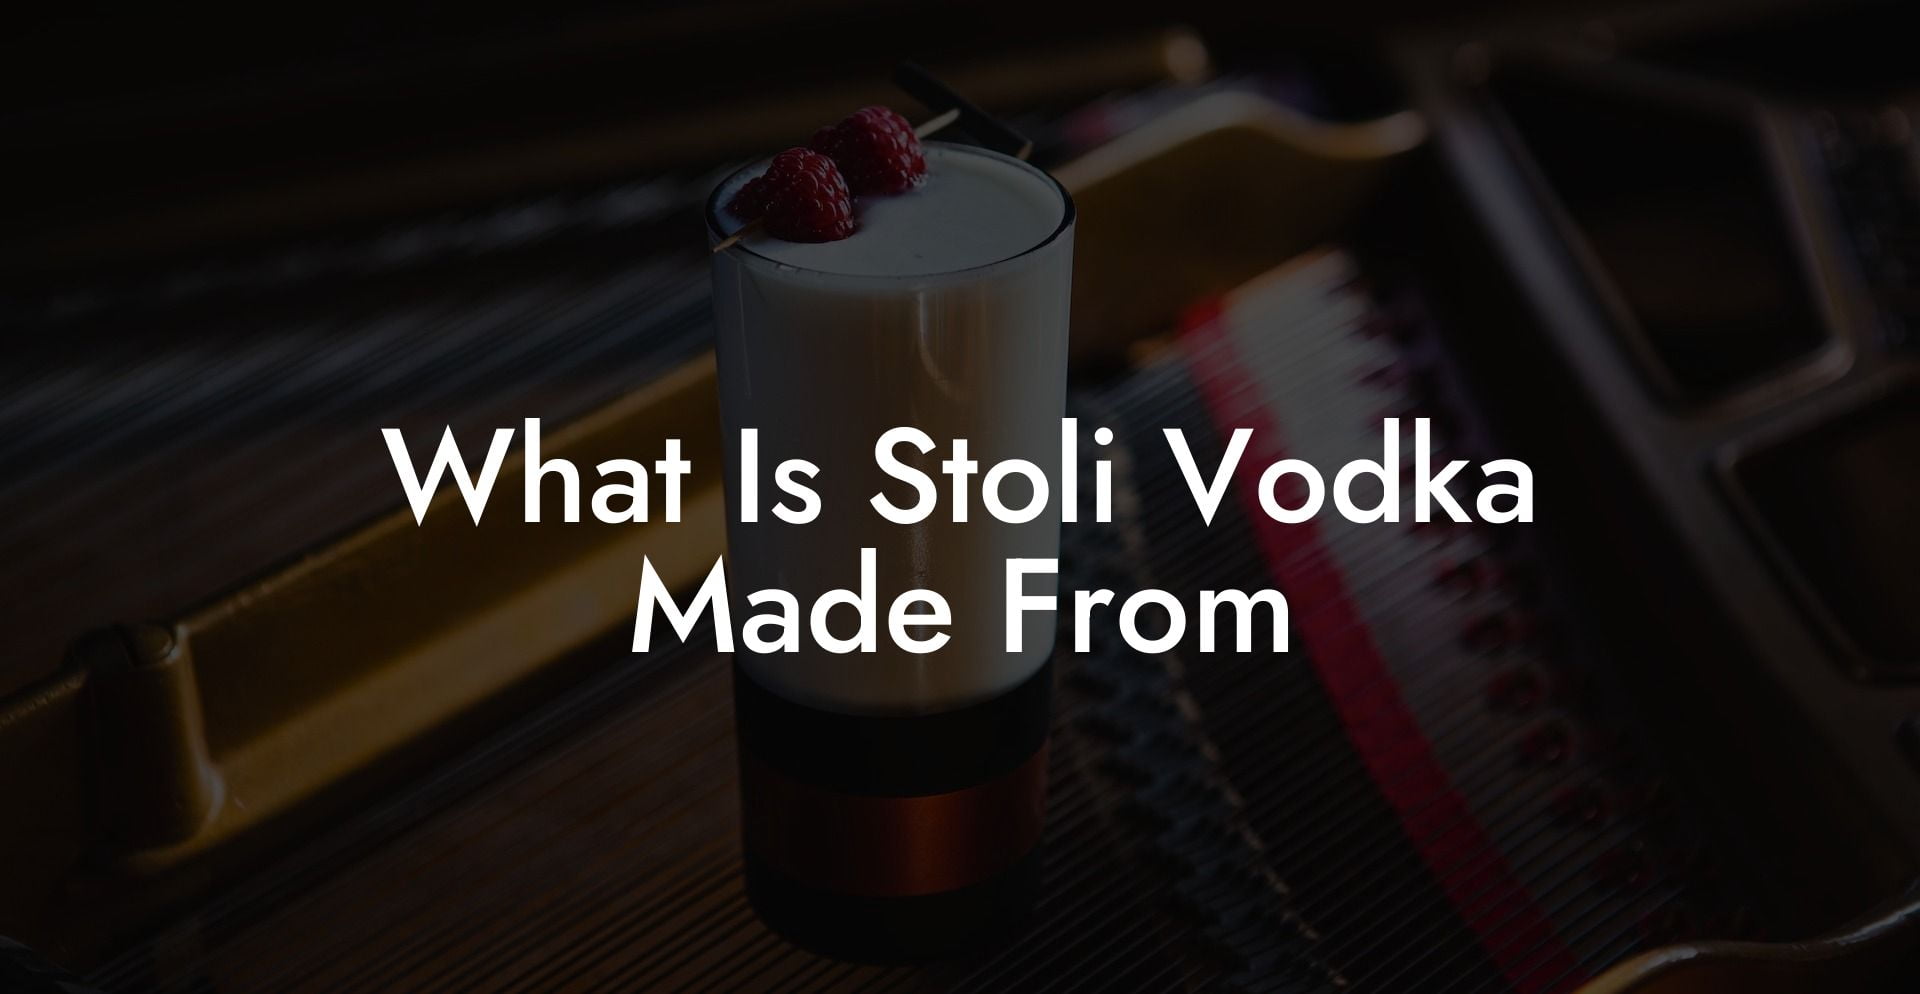 What Is Stoli Vodka Made From